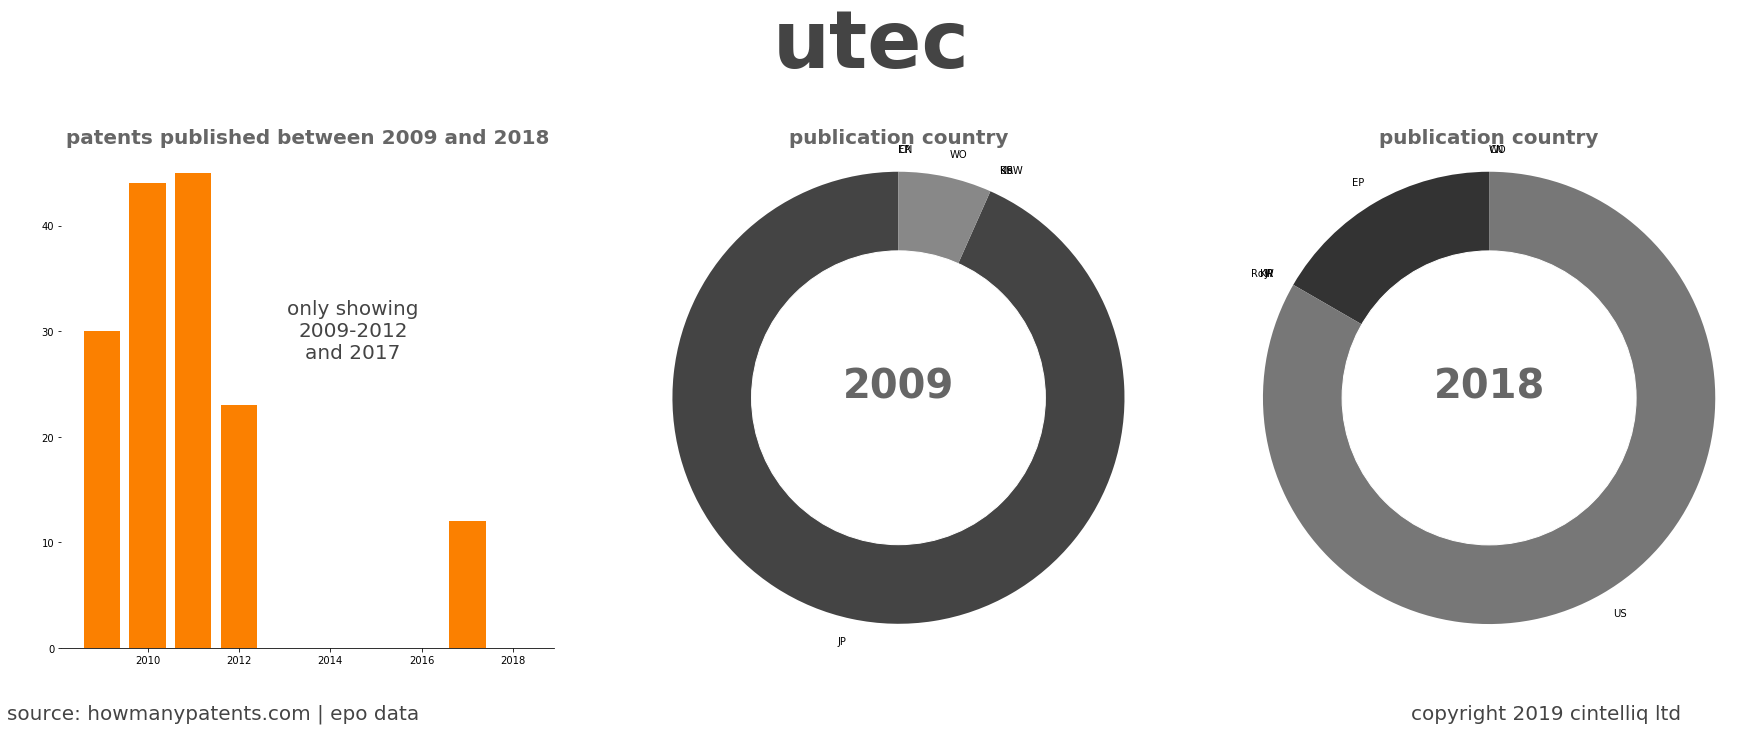 summary of patents for Utec